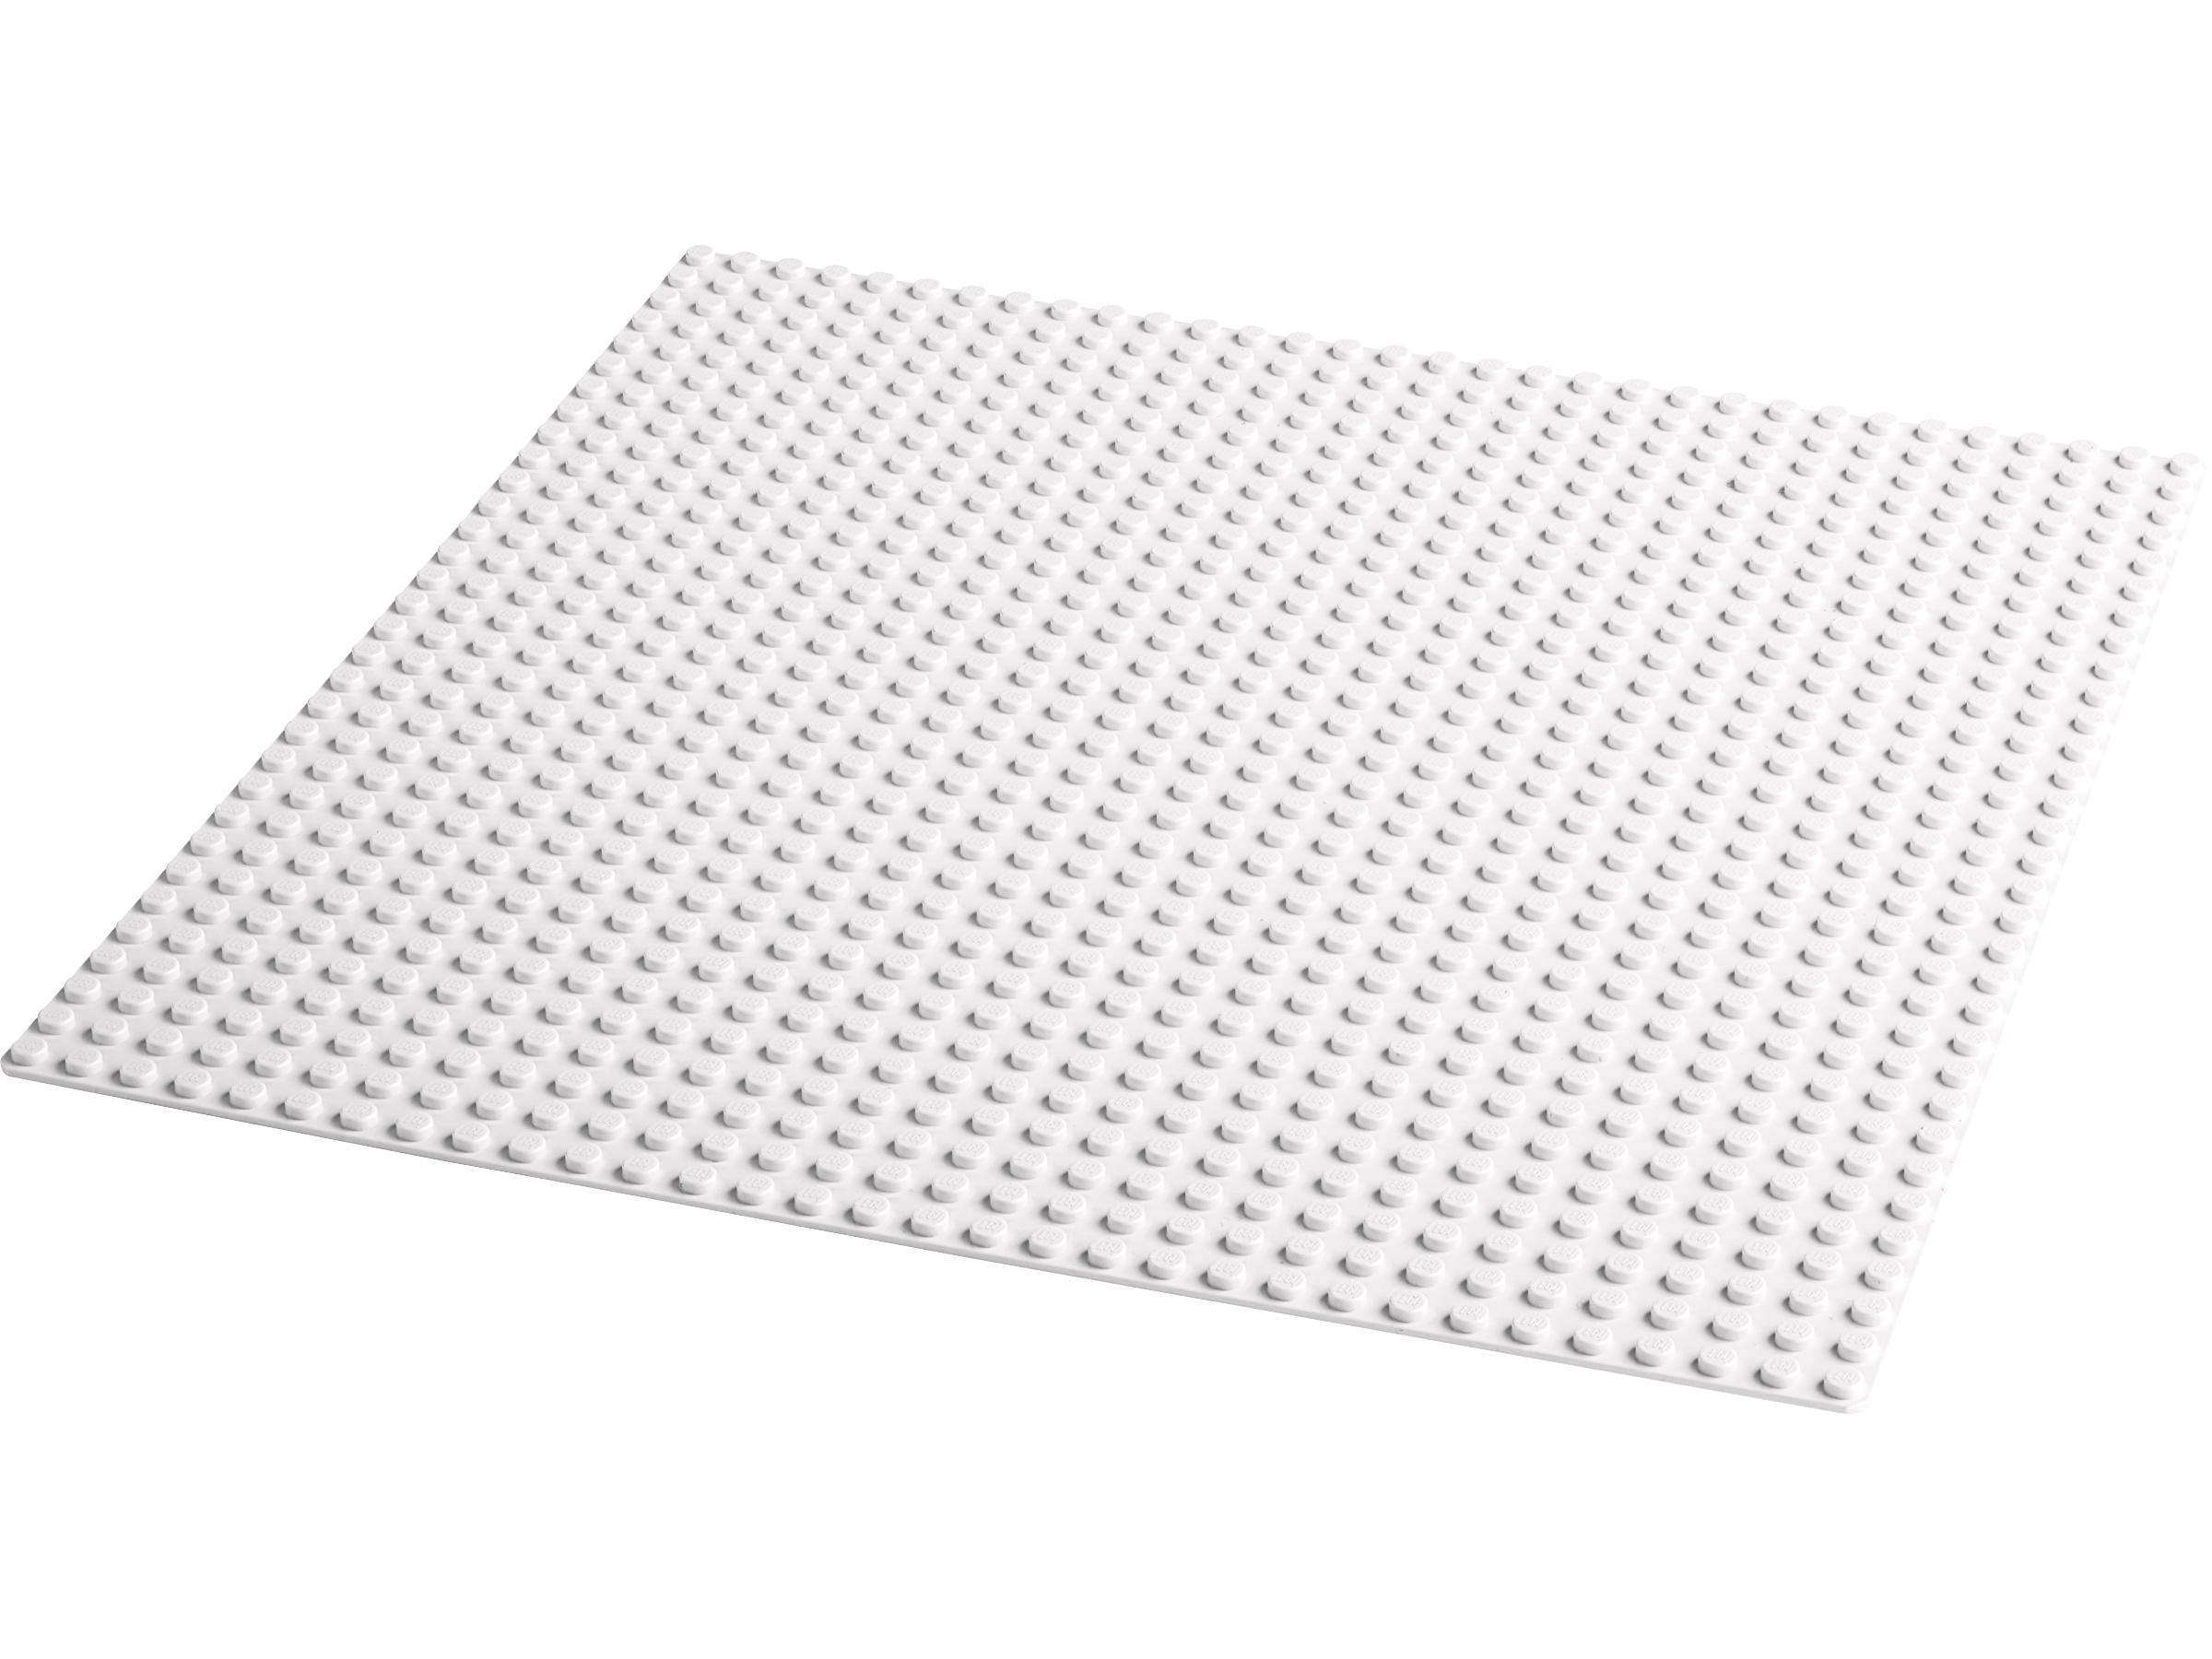 White Baseplate 11026 | Buy online at the Official Shop US